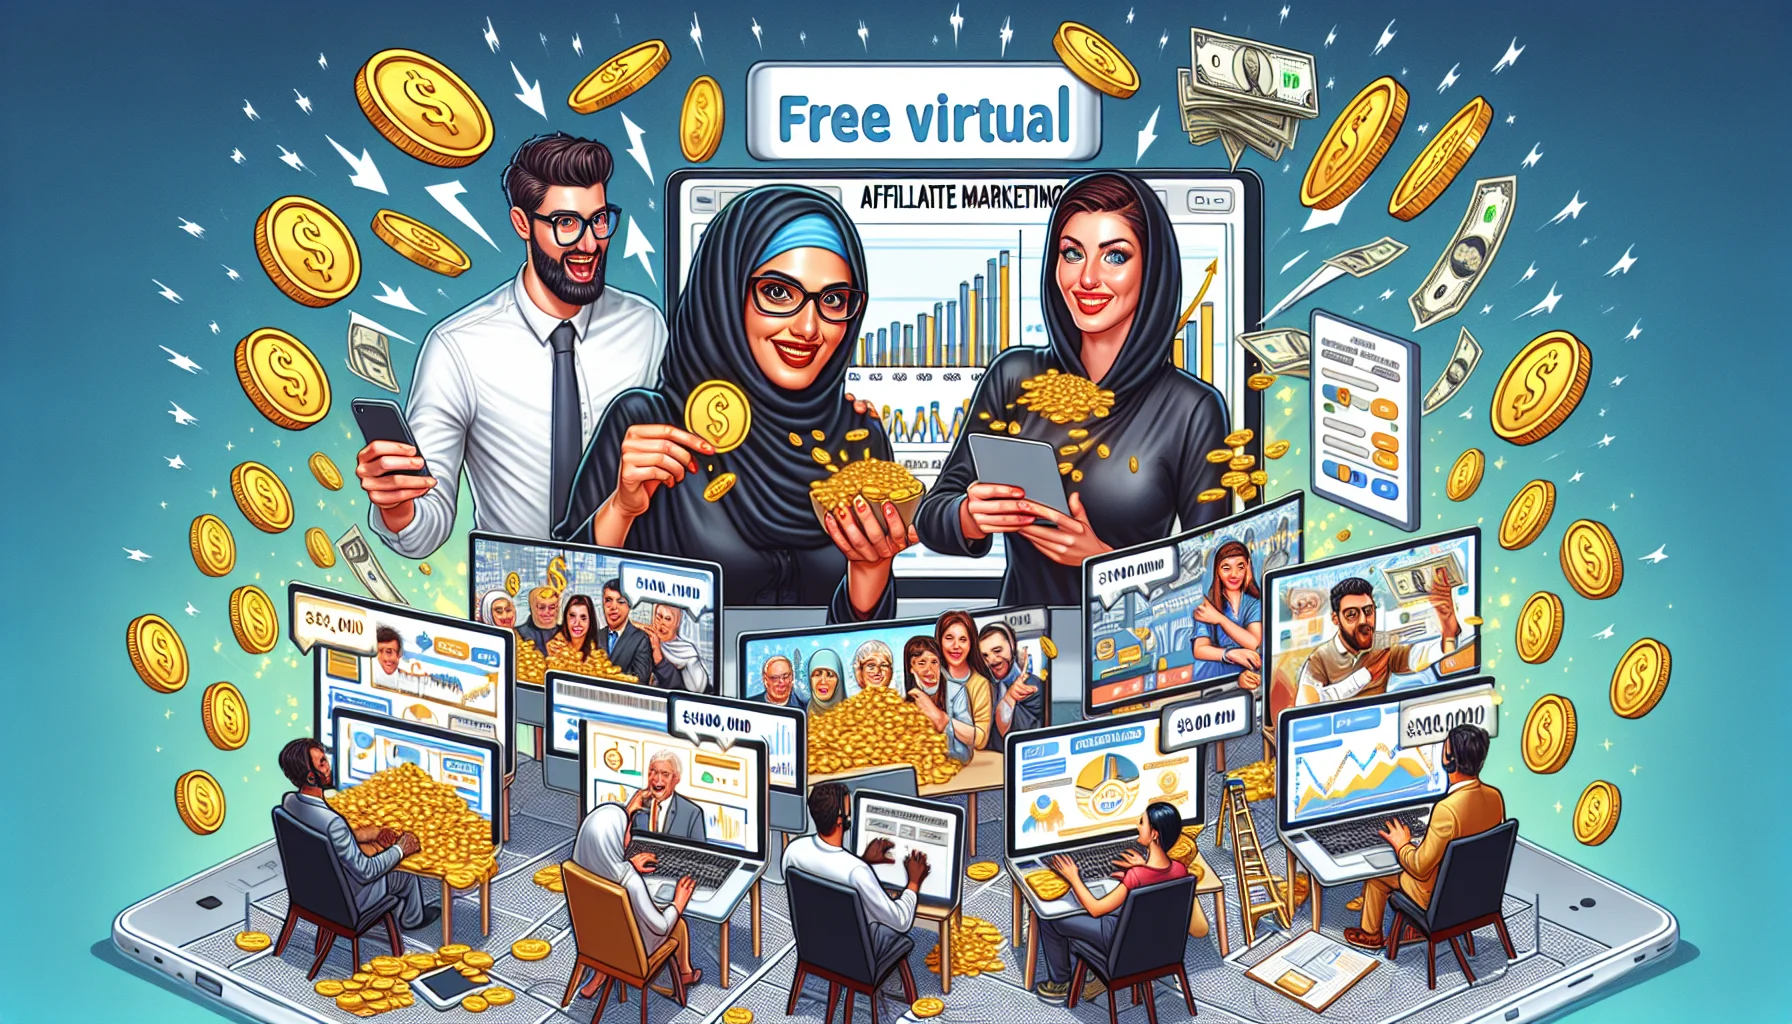 Generate a humorous, realistic illustration portraying a free virtual event on affiliate marketing. The image should demonstrate an enticing setup where people of different descents and genders, such as a Middle-Eastern woman and a Caucasian man, are interacting with their computer screens, showcasing their reaction to the potential of earning money online. The screens should display various charts, diagrams and dollar signs to emphasize the financial benefits. Use clever symbols, including cash raining from the sky or gold coins popping out from their computer screens, to artistically depict the concept of making money online.